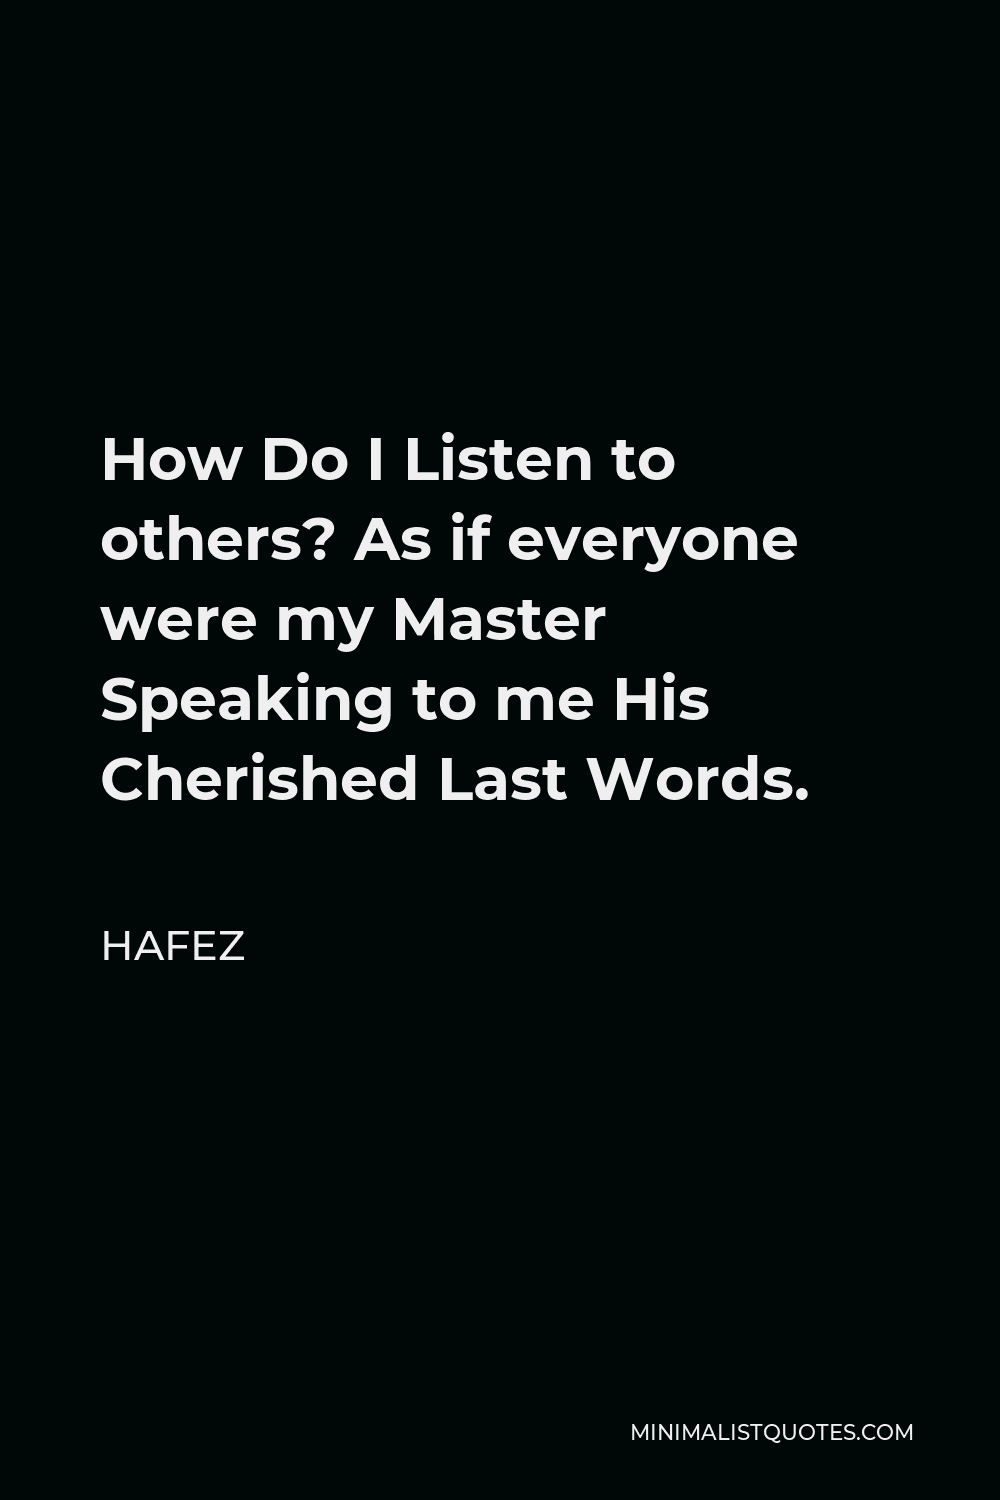 Hafez Quote - How Do I Listen to others? As if everyone were my Master Speaking to me His Cherished Last Words.